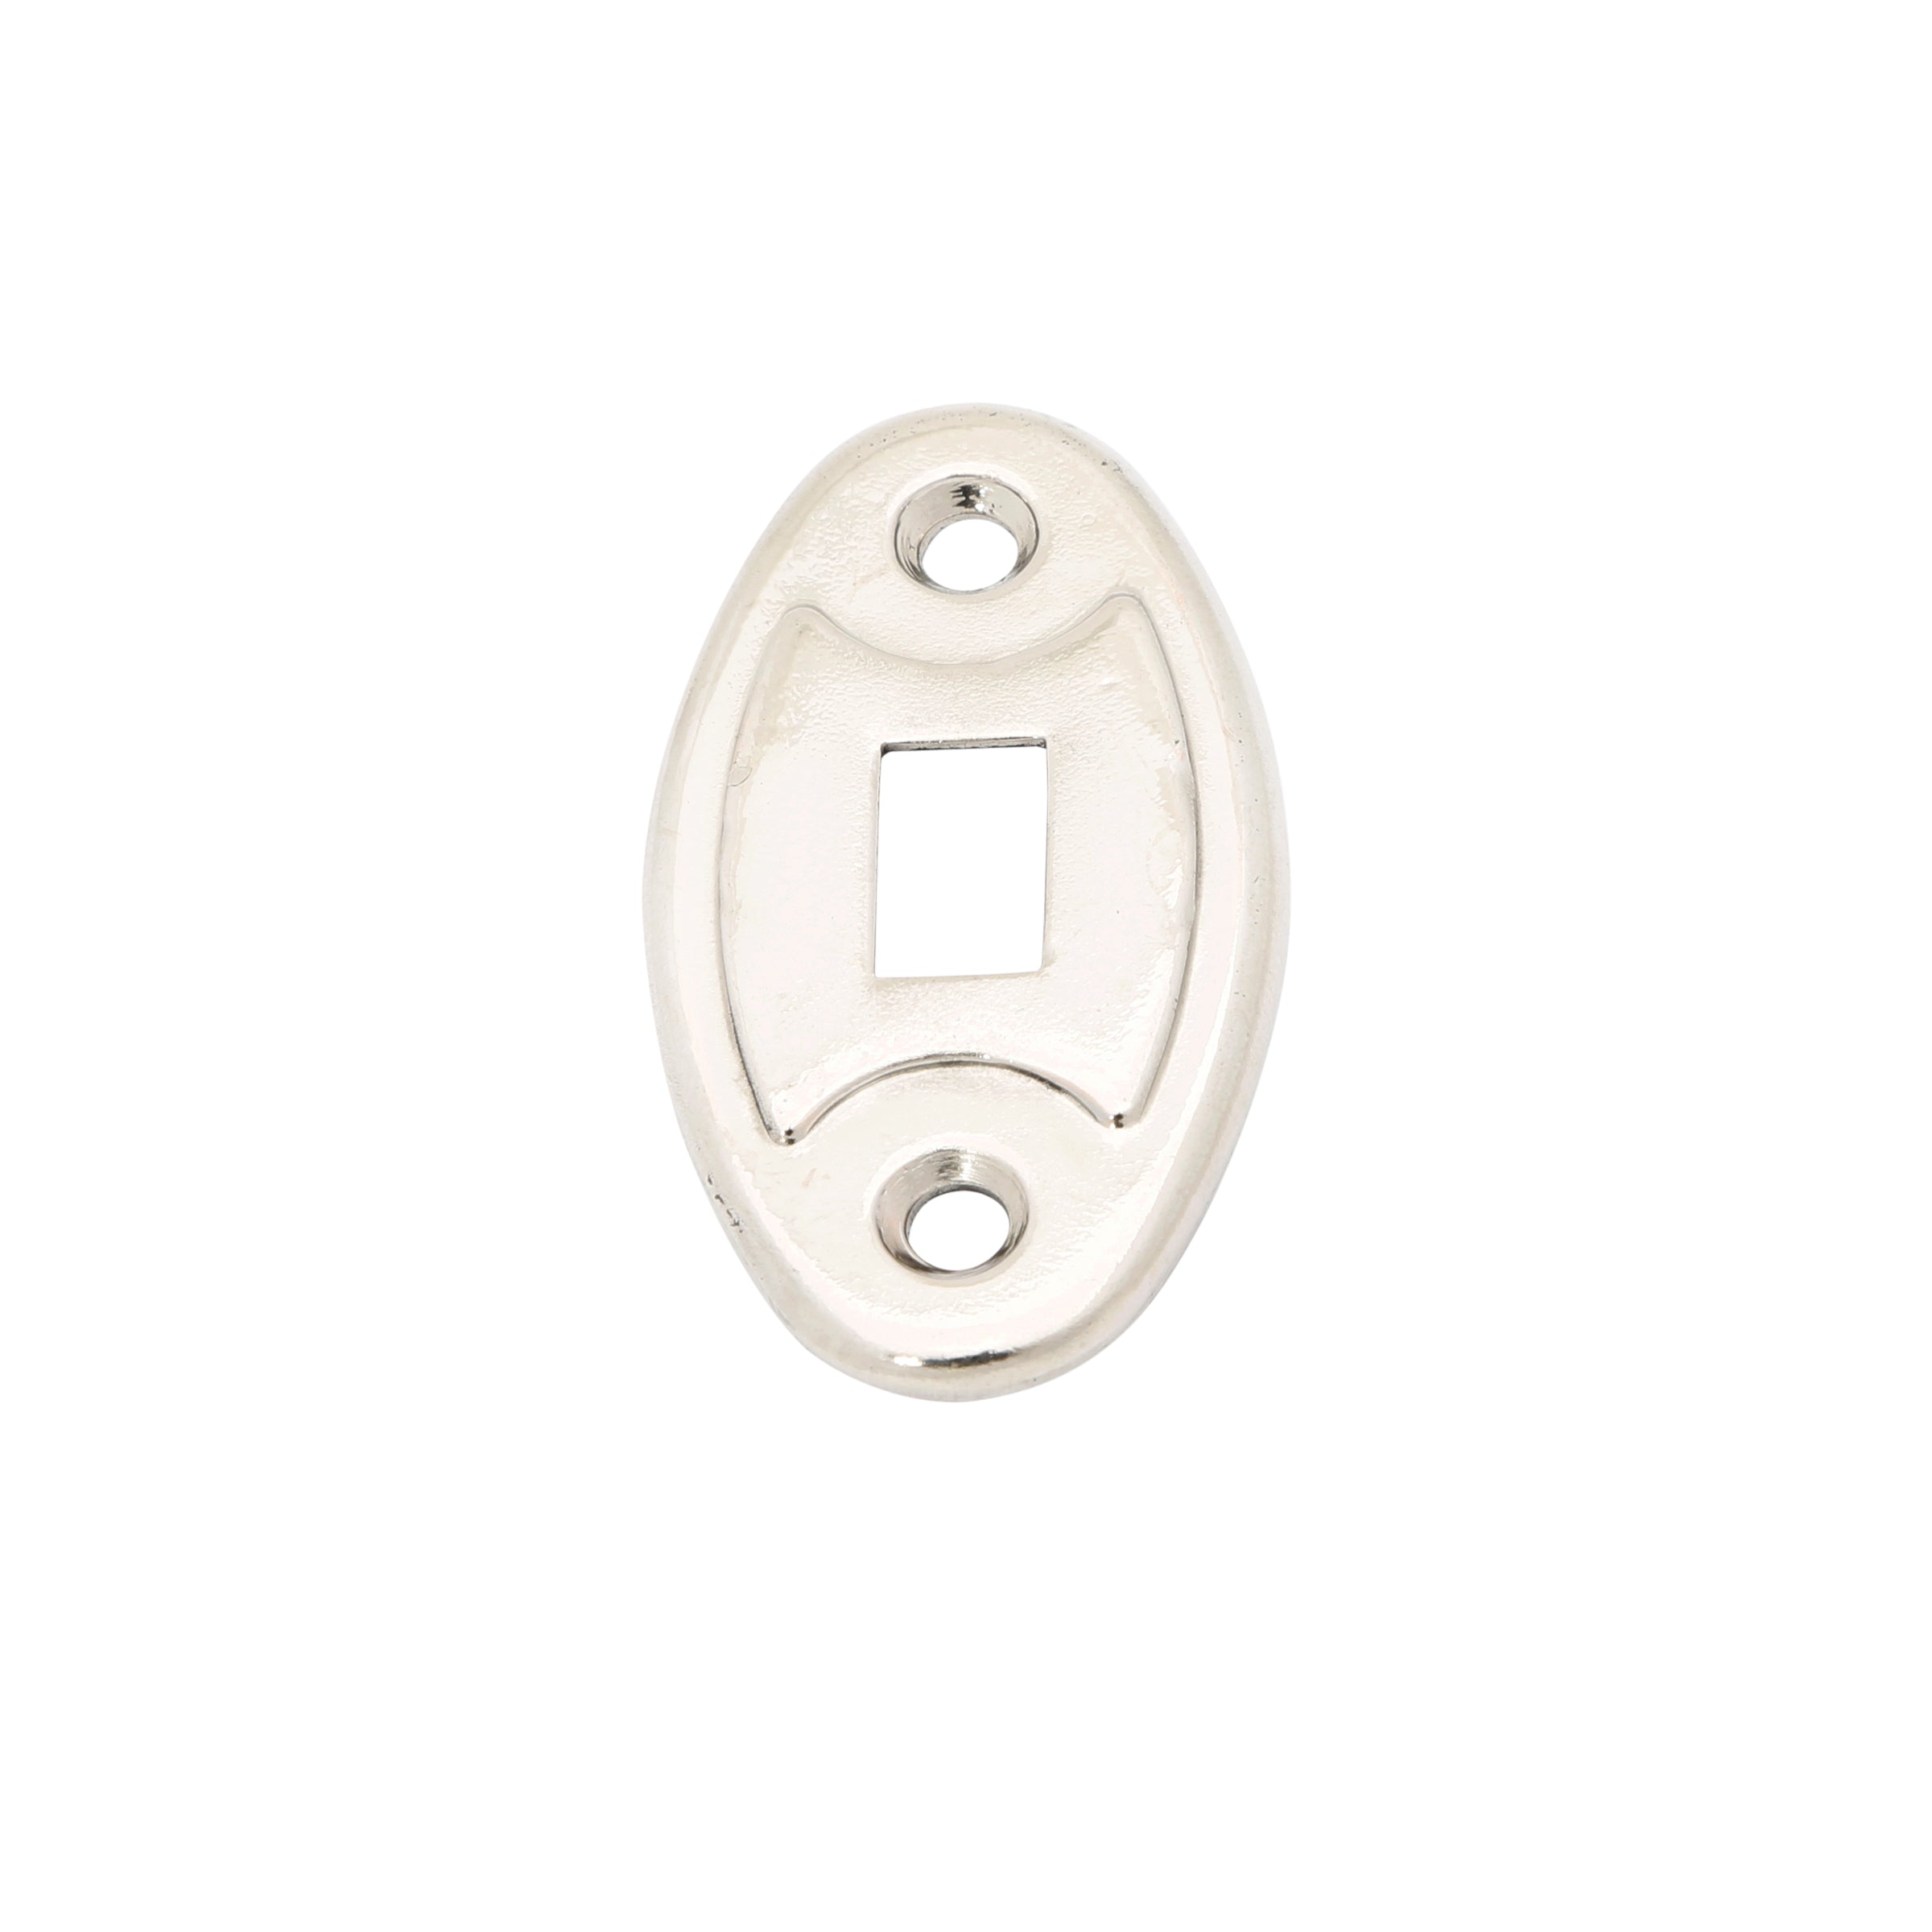 Dome Light Switch Plate • 1932-40 Ford Passenger